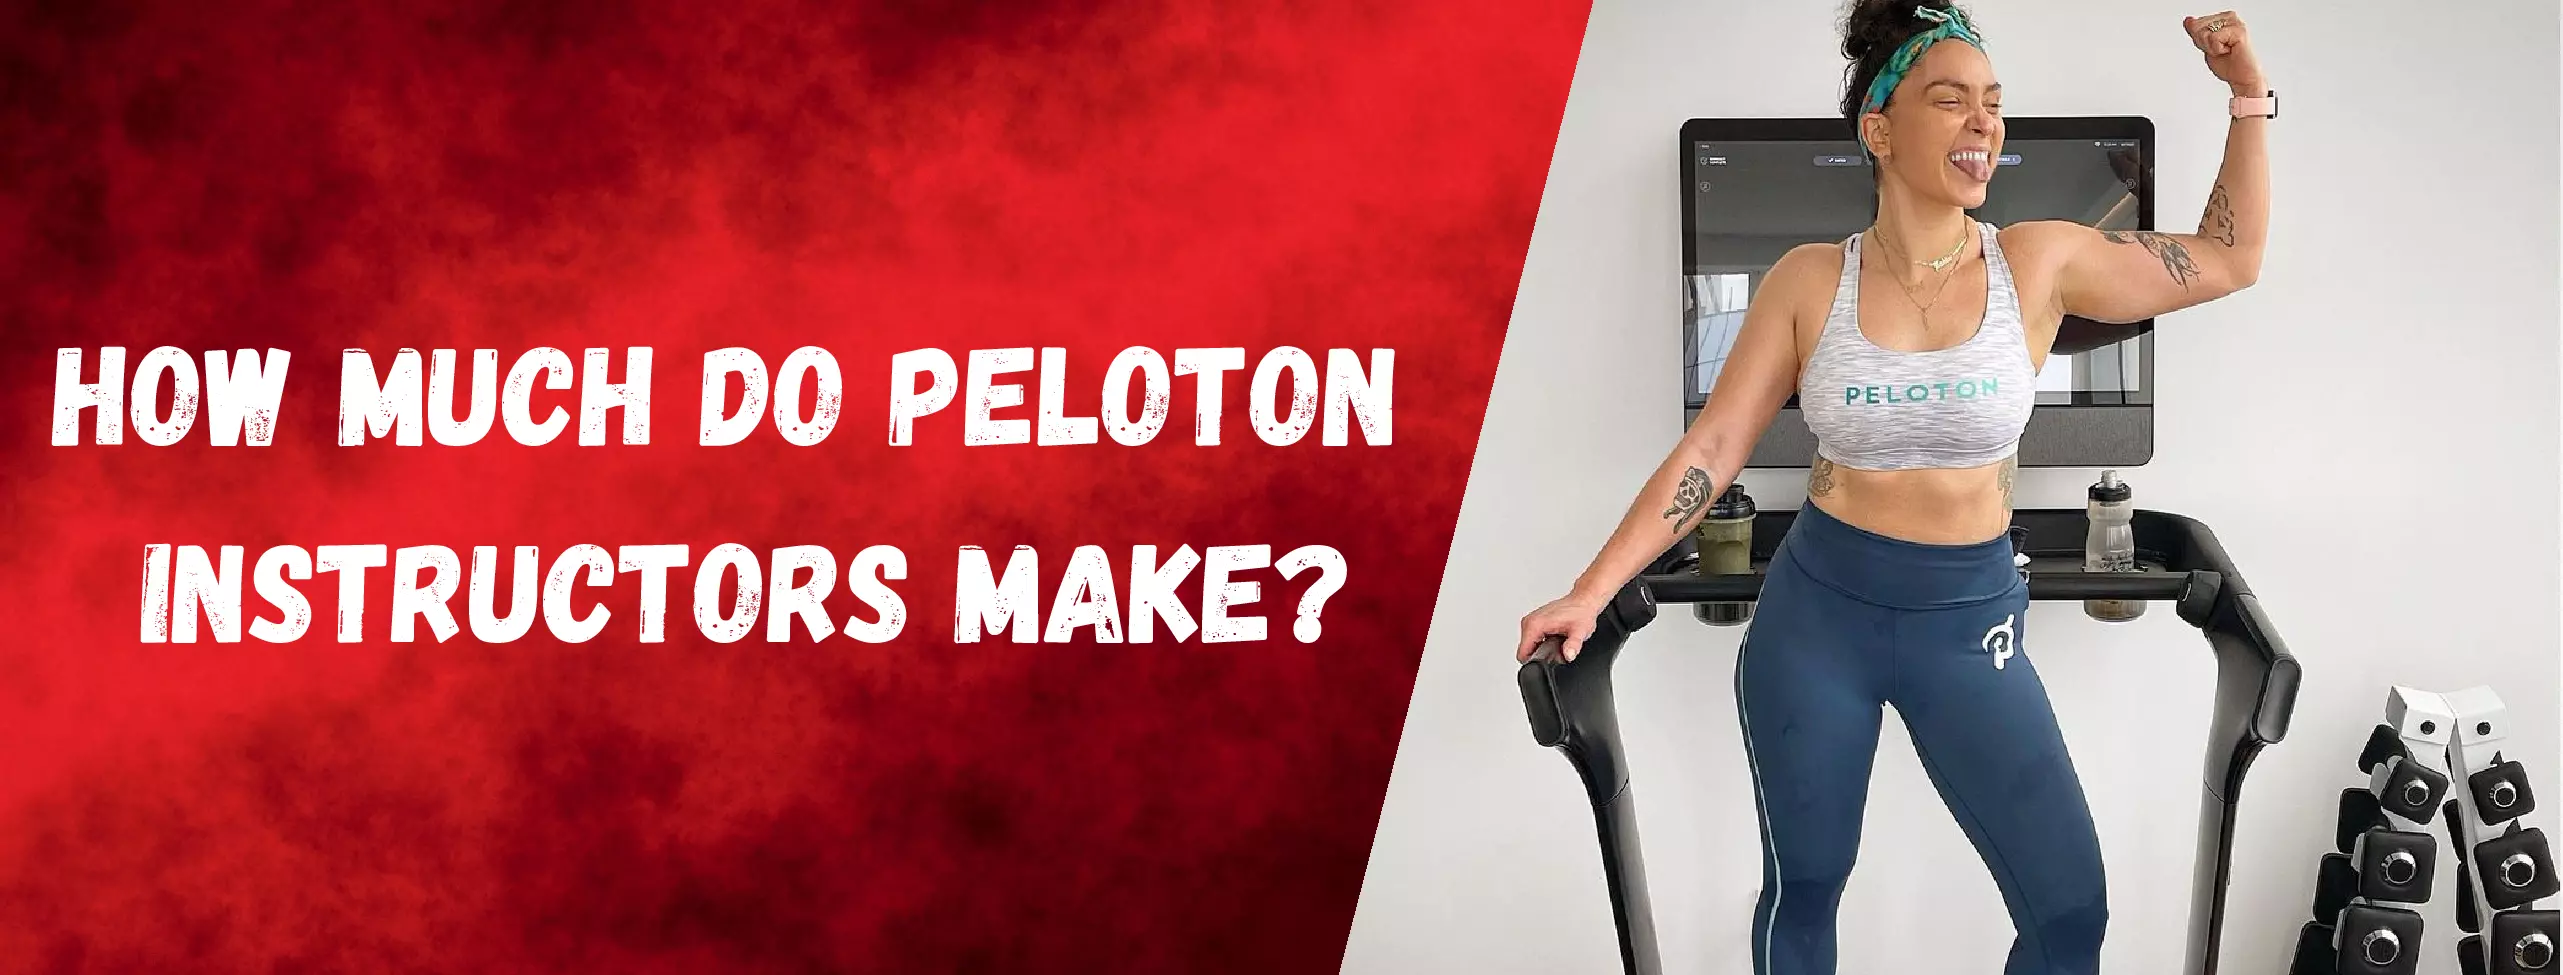 How Much Do Peloton Instructors Make